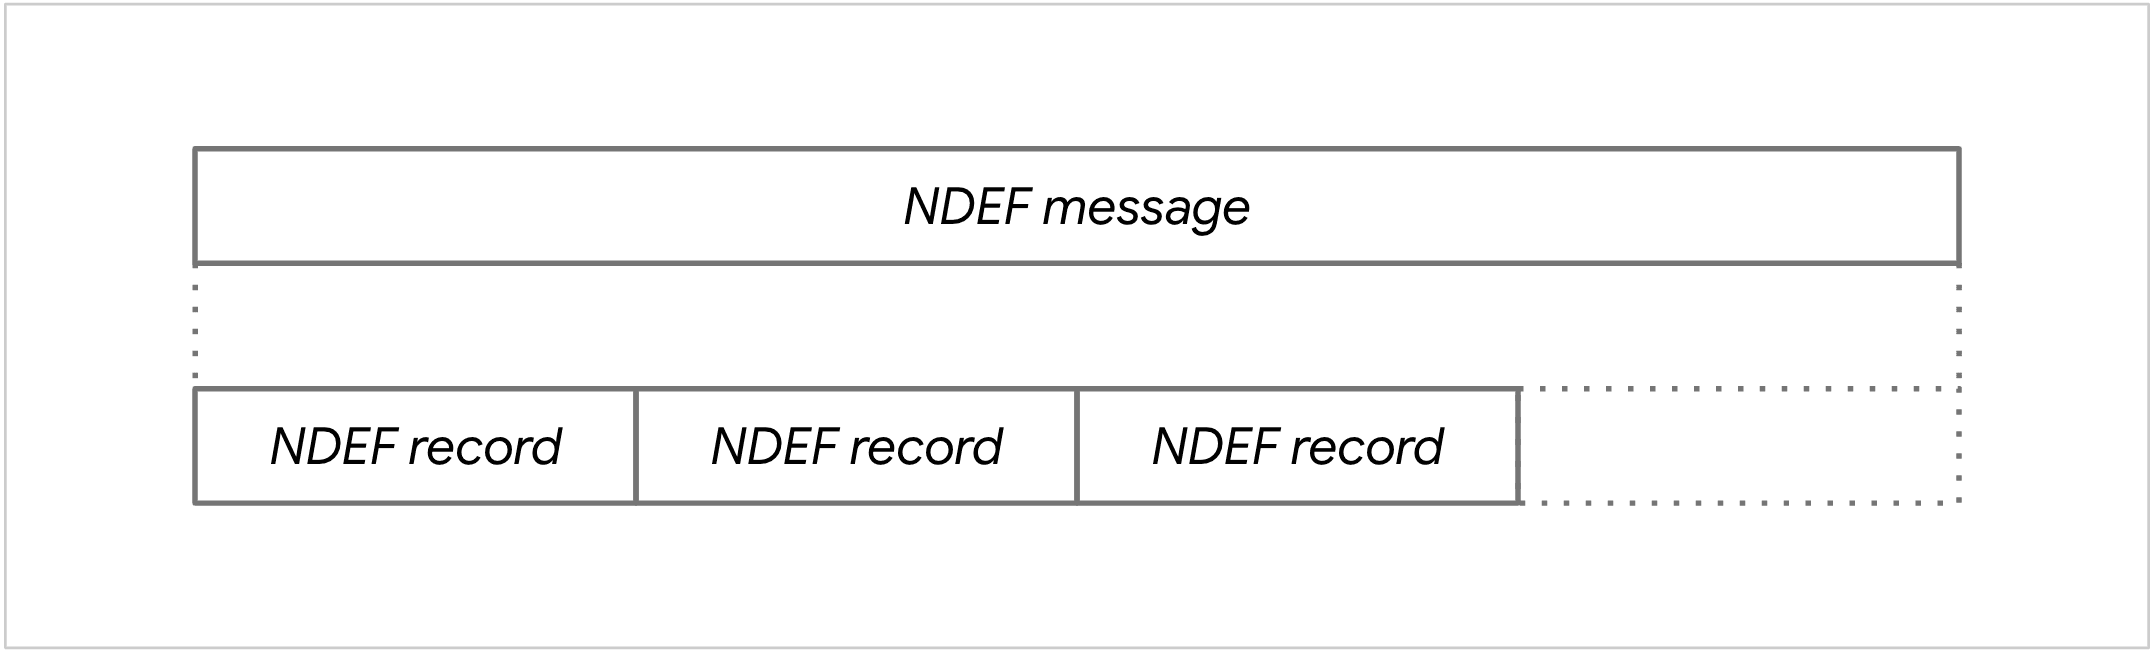 Diagram of an NDEF message